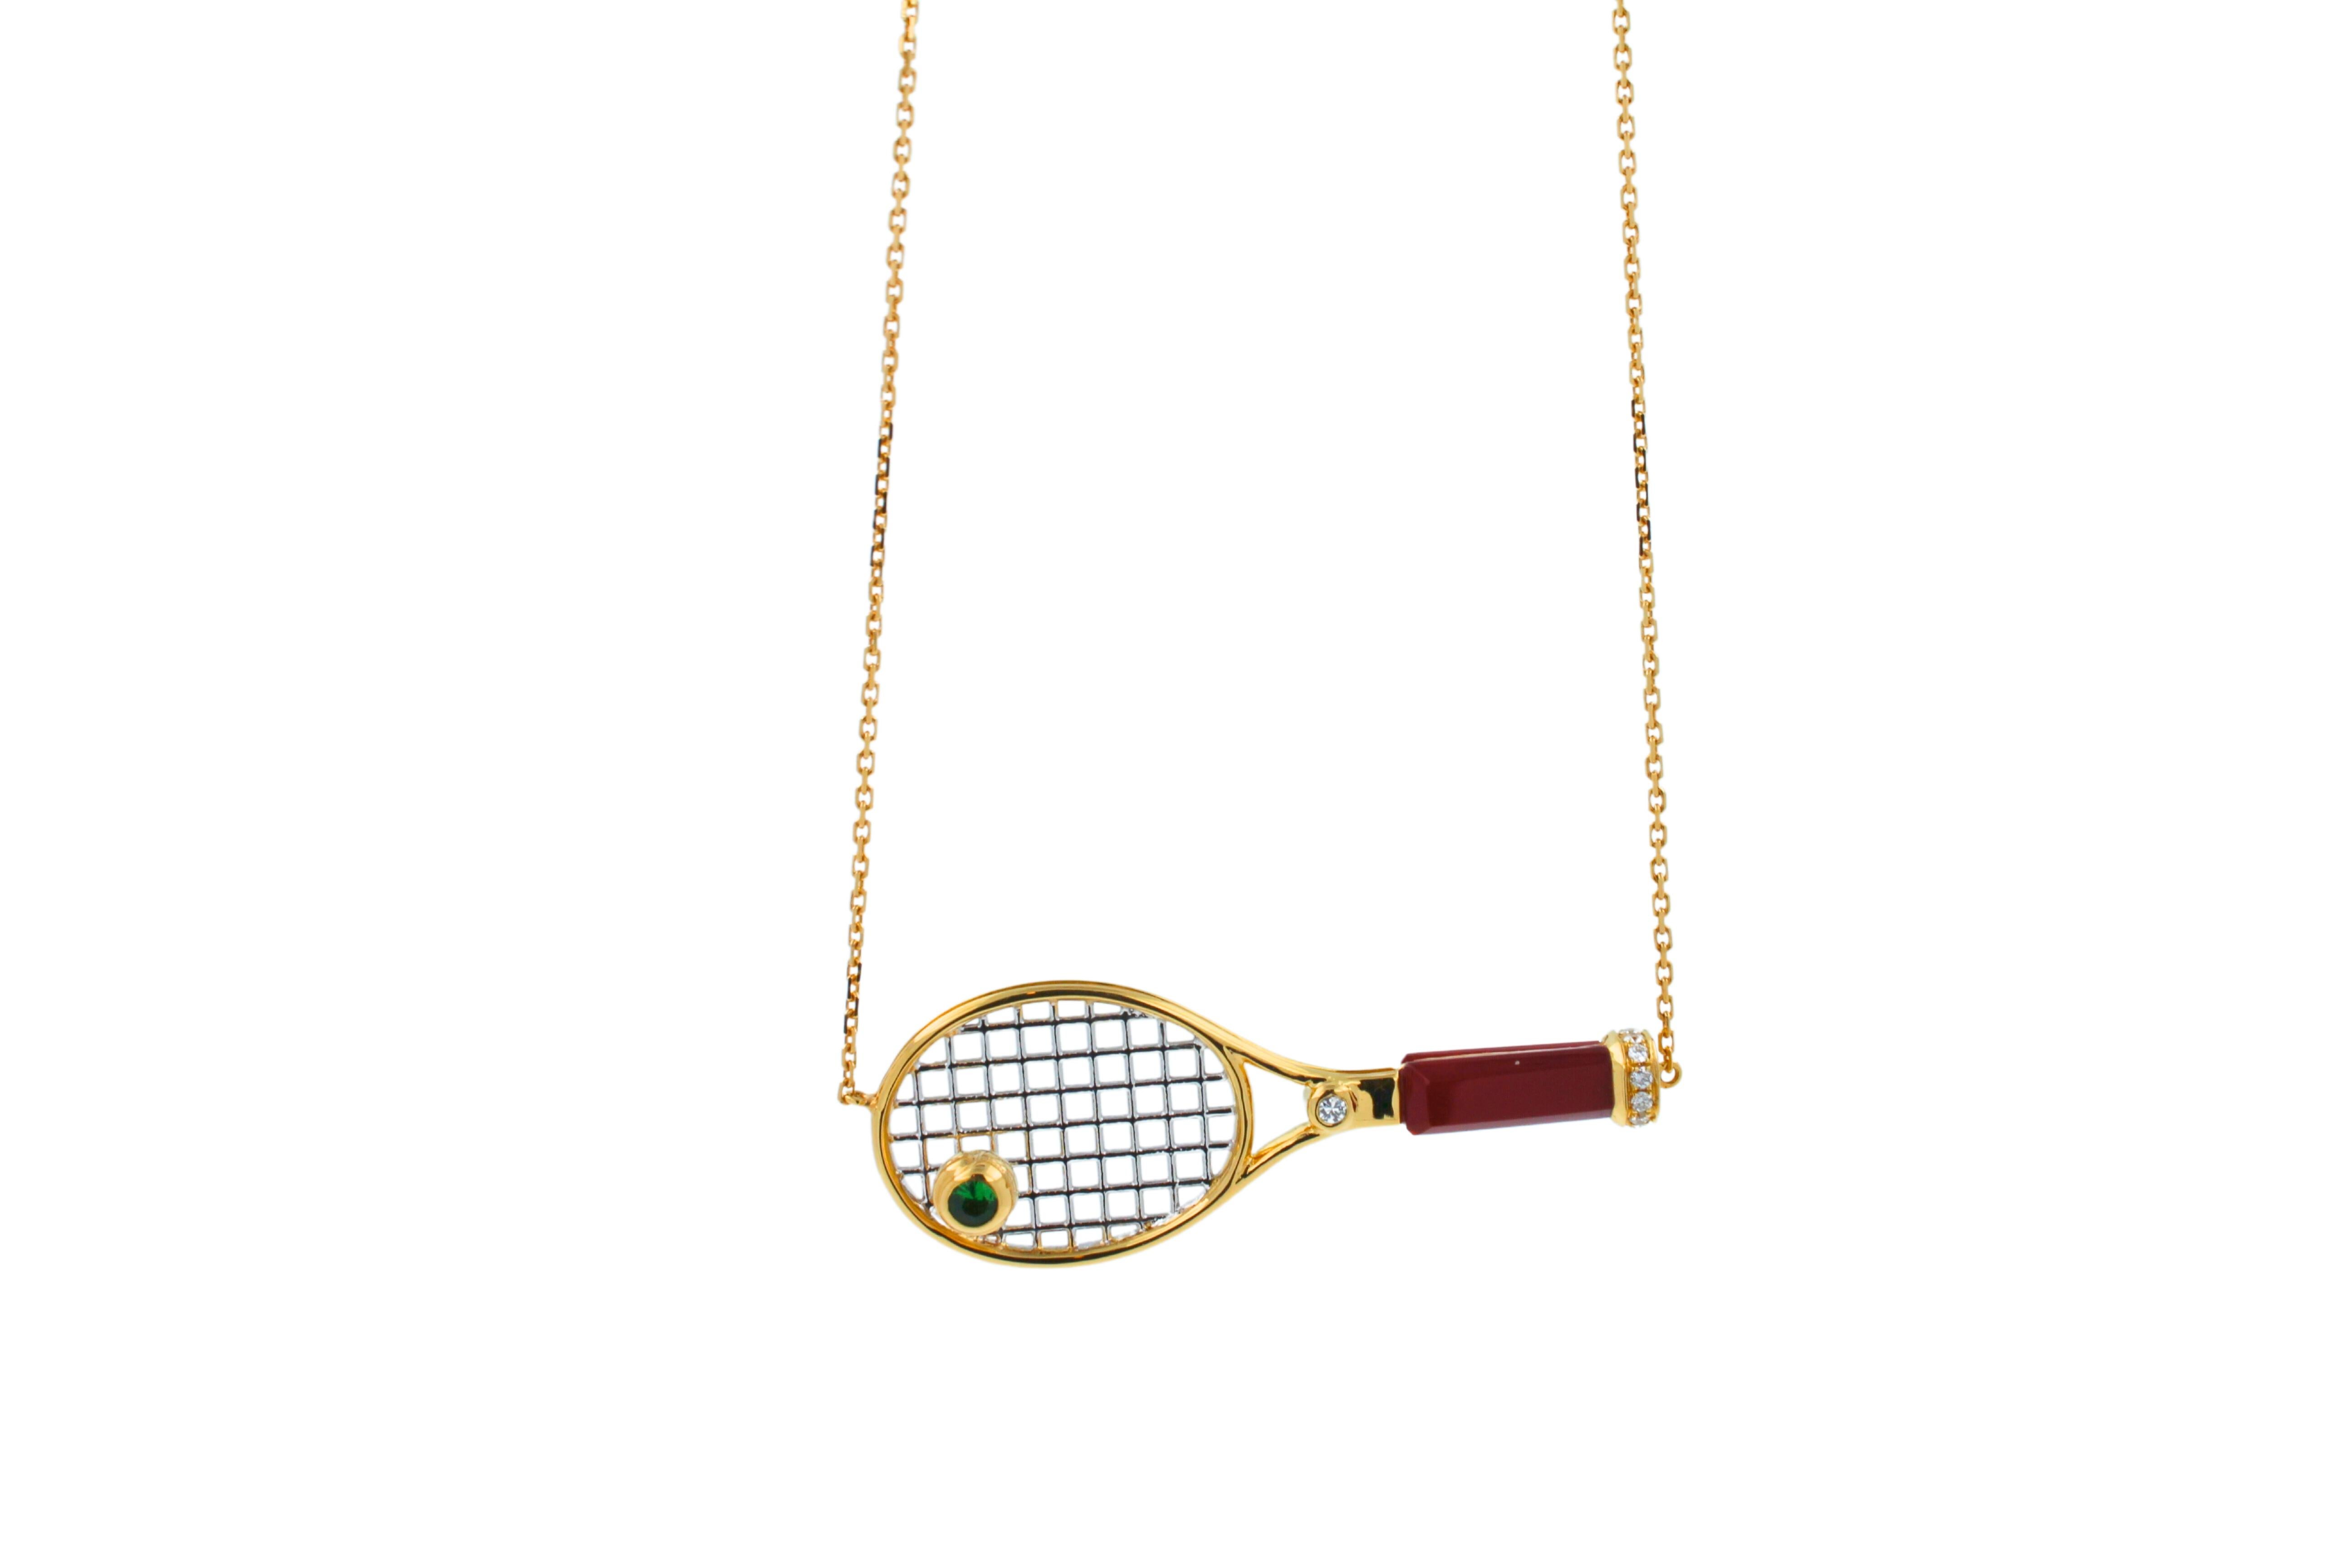 18K Yellow Gold
Red Carnelian Gemstone Handle
Green Emerald Tennis Ball Gemstone
0.25 cts Diamonds
16-18 inches Diamond-Cut Link Cable adjustable chain length
Approximate Ace Racket Length: 1.77” inches / 4.5 centimeters
Designed & Handmade in